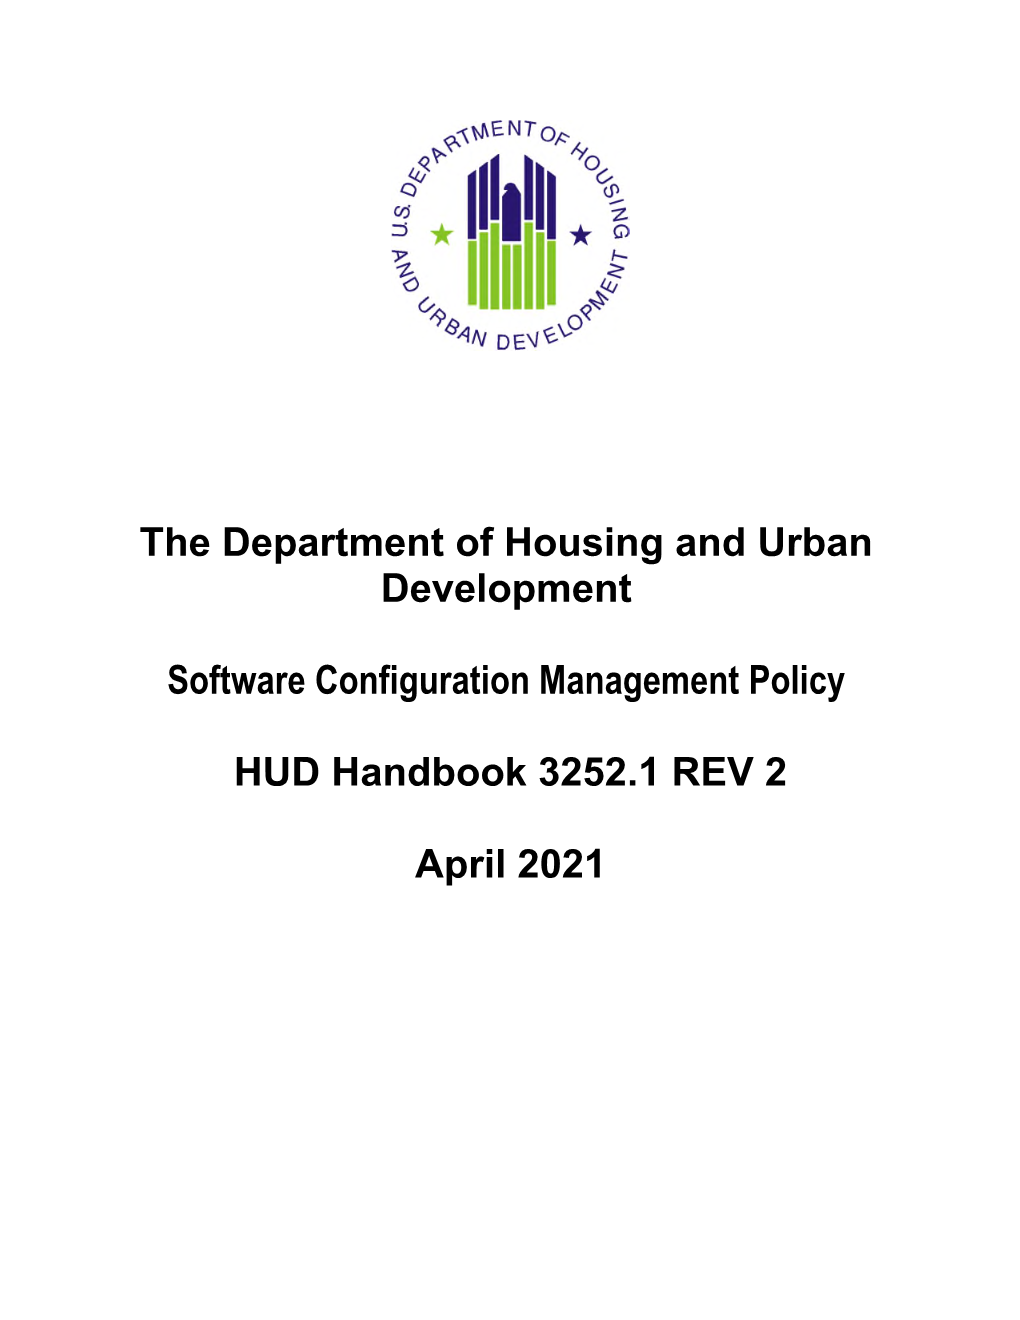 The Department of Housing and Urban Development Software Configuration Management Policy HUD Handbook 3252.1 REV 2 April 2021